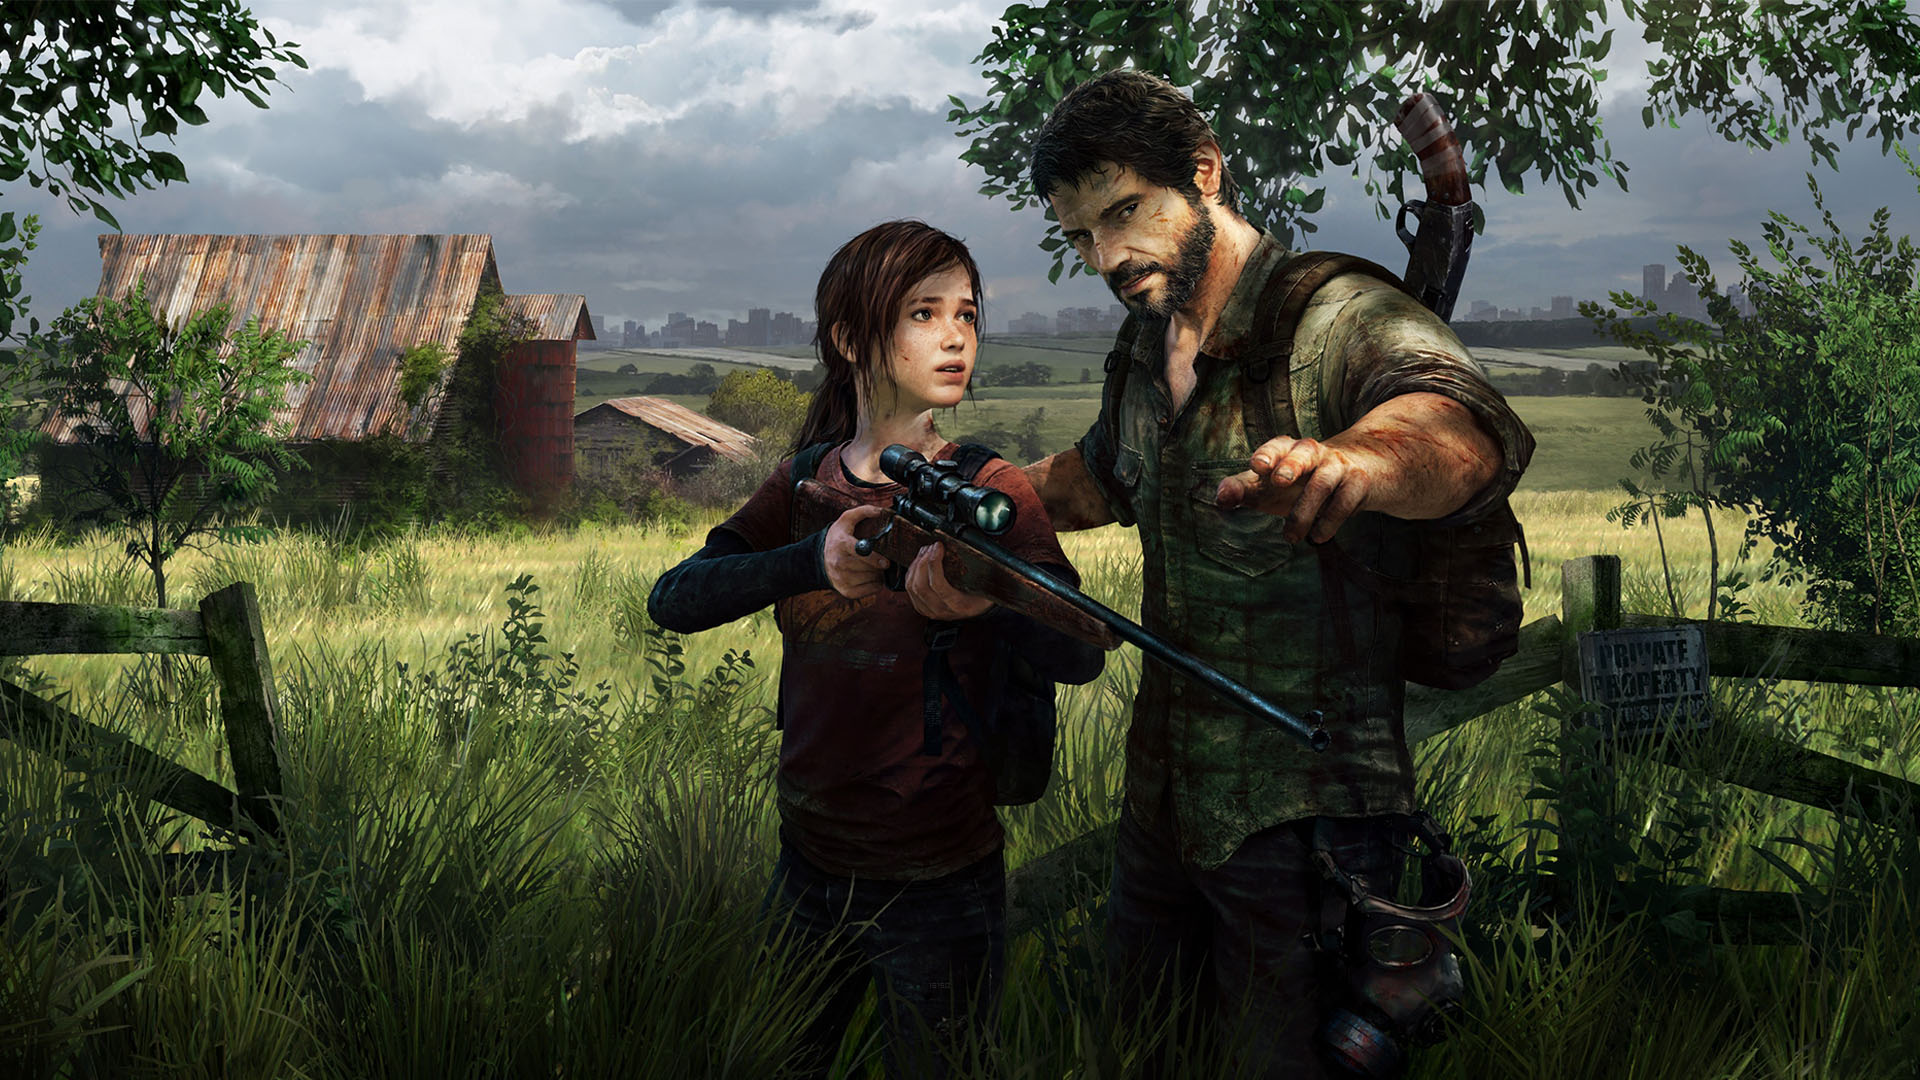 HD desktop wallpaper: Street, Video Game, Post Apocalyptic, The Last Of Us  download free picture #1405501